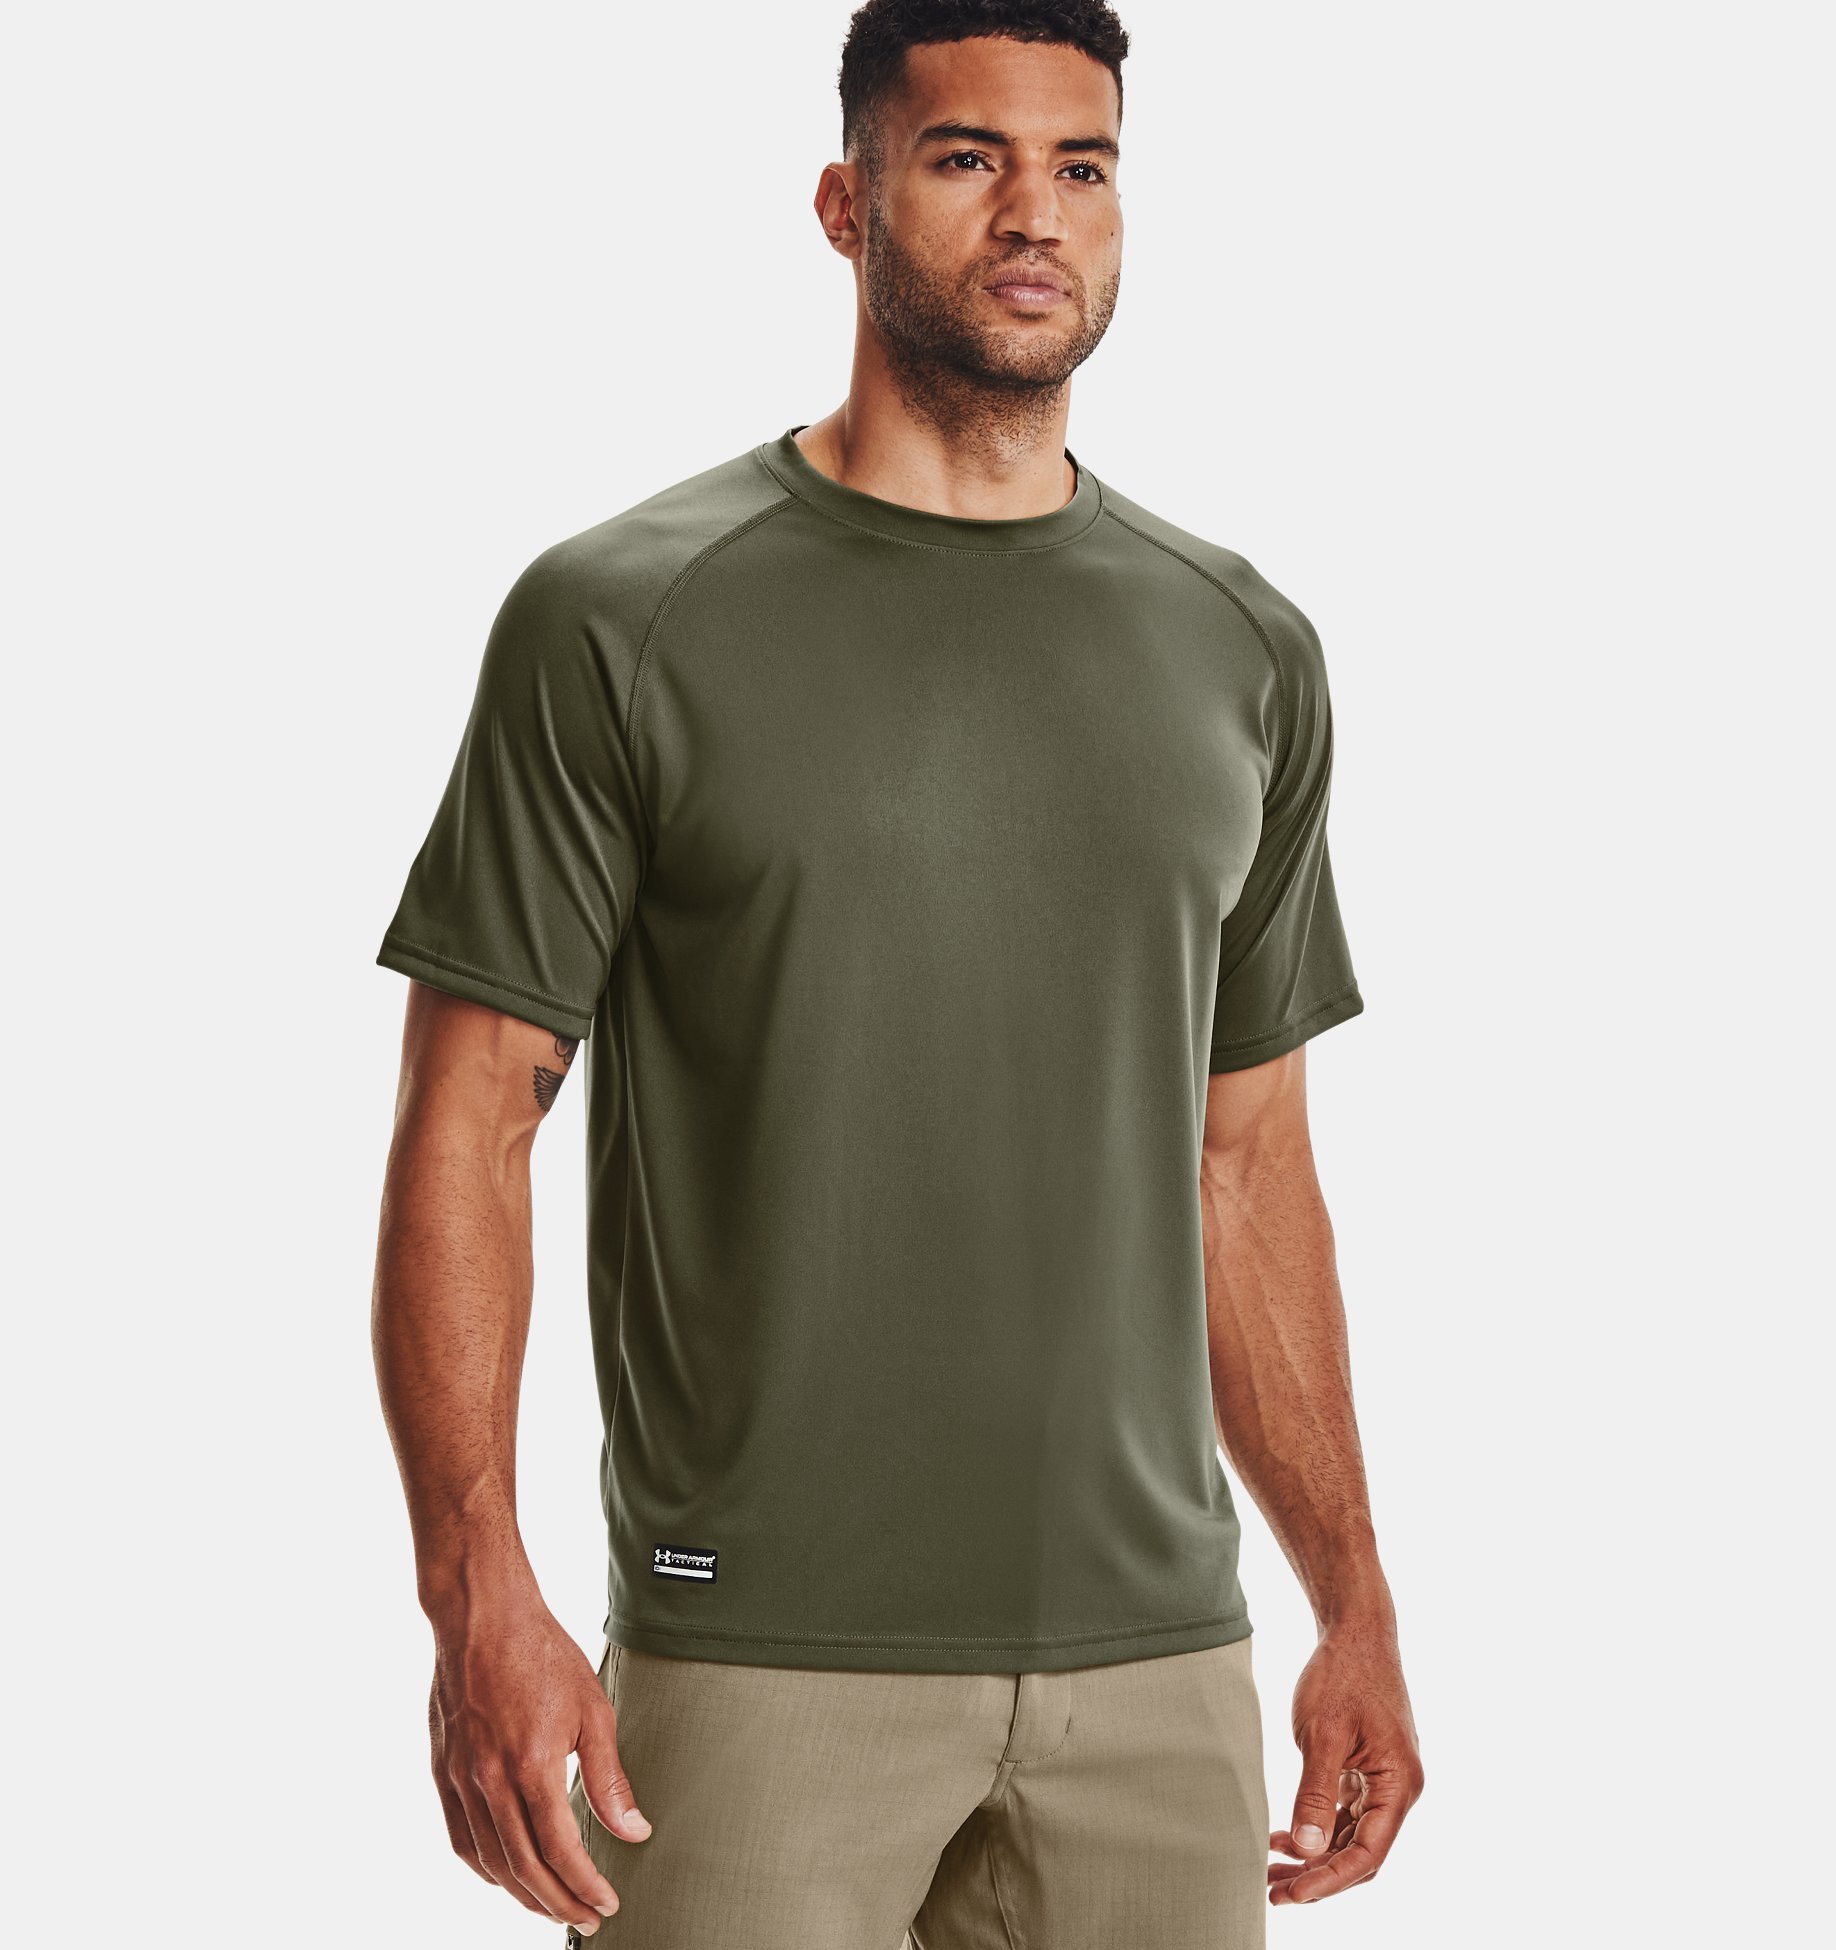 New!!! Green Under Armour HeatGear Short sleeve Loose Fit T-Shirt Color 